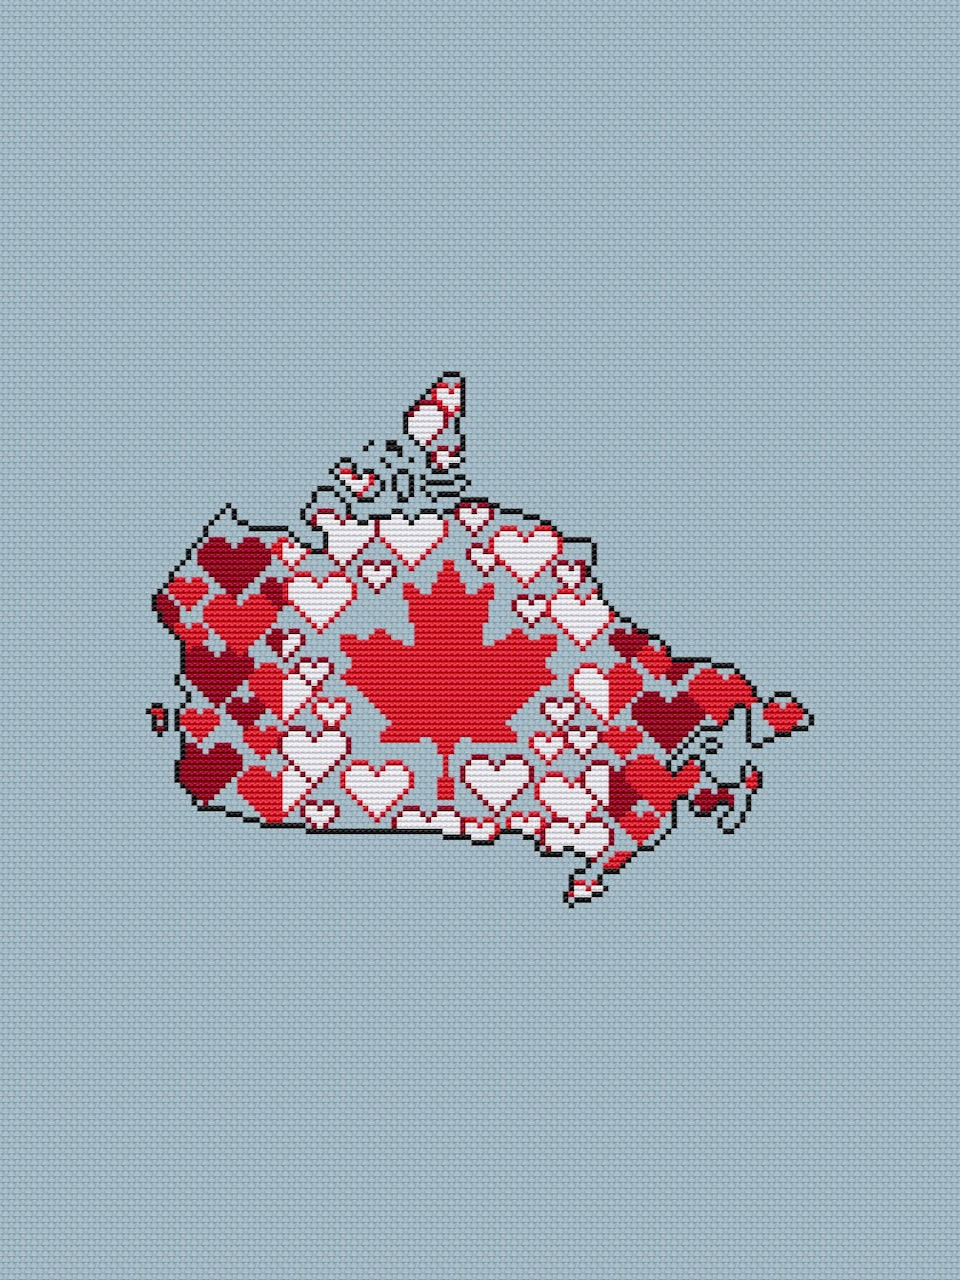 Canada free embroidery pattern